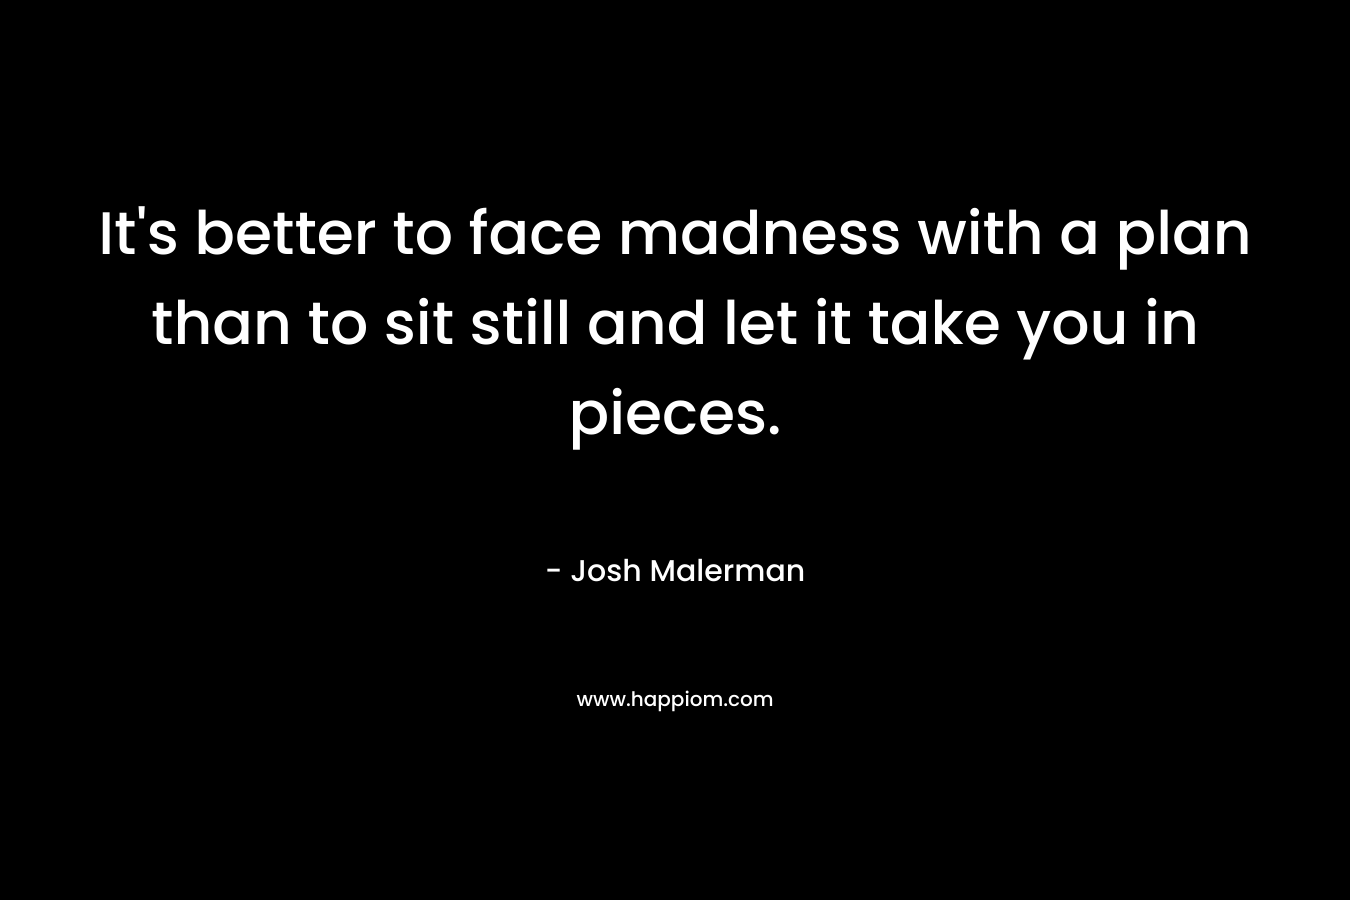 It’s better to face madness with a plan than to sit still and let it take you in pieces. – Josh Malerman